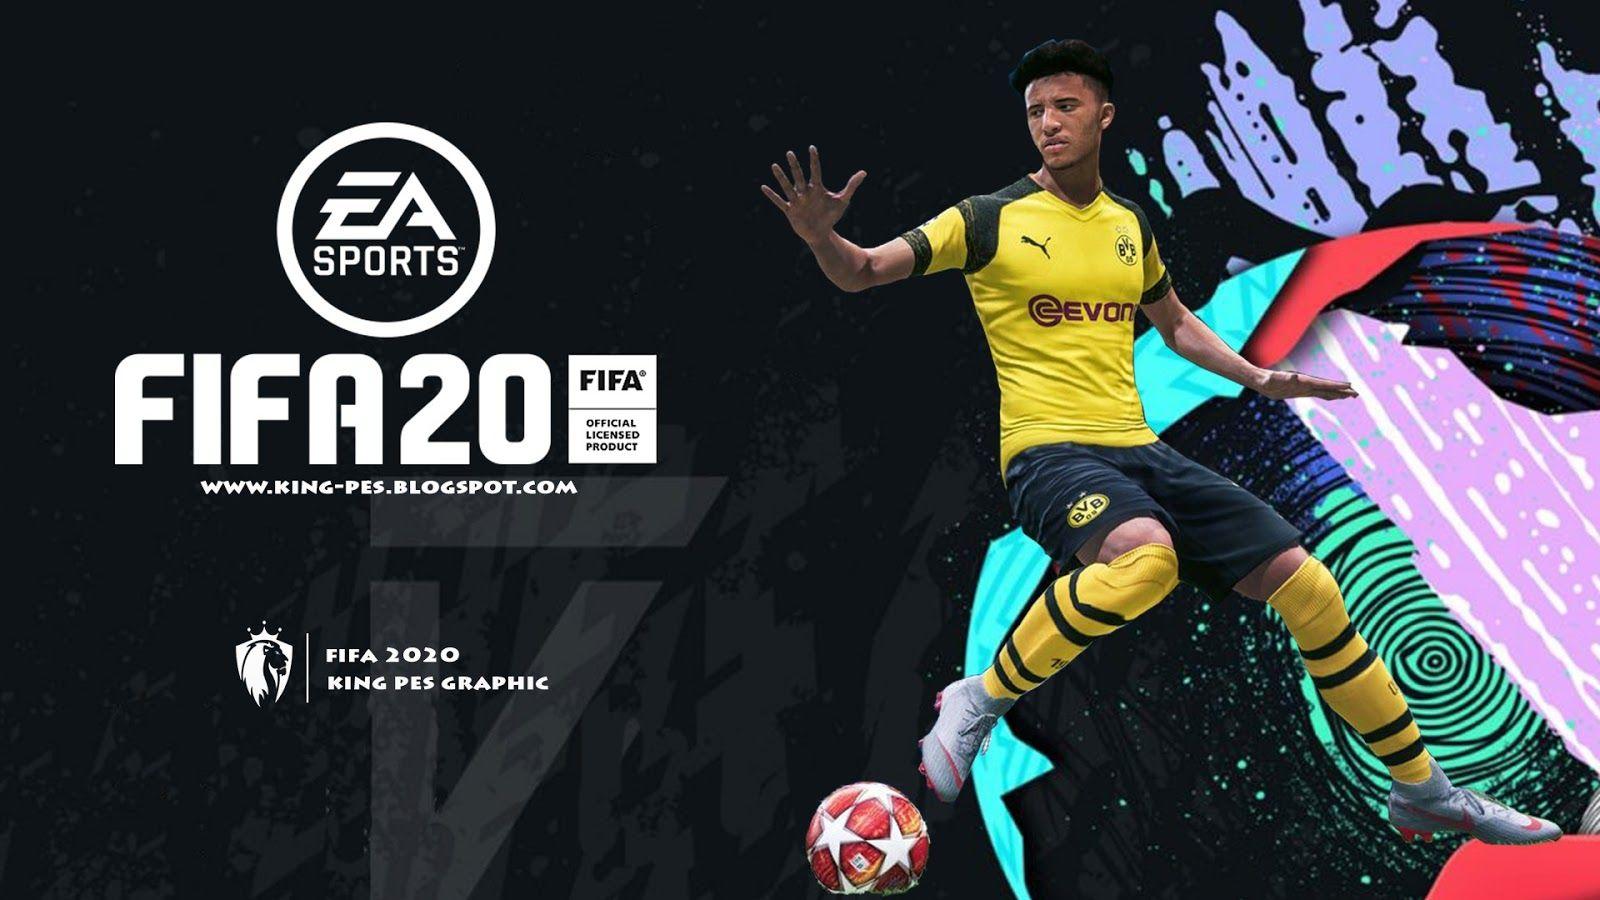 FIFA 20 Ultimate Team Features Revealed  FIFA Infinity